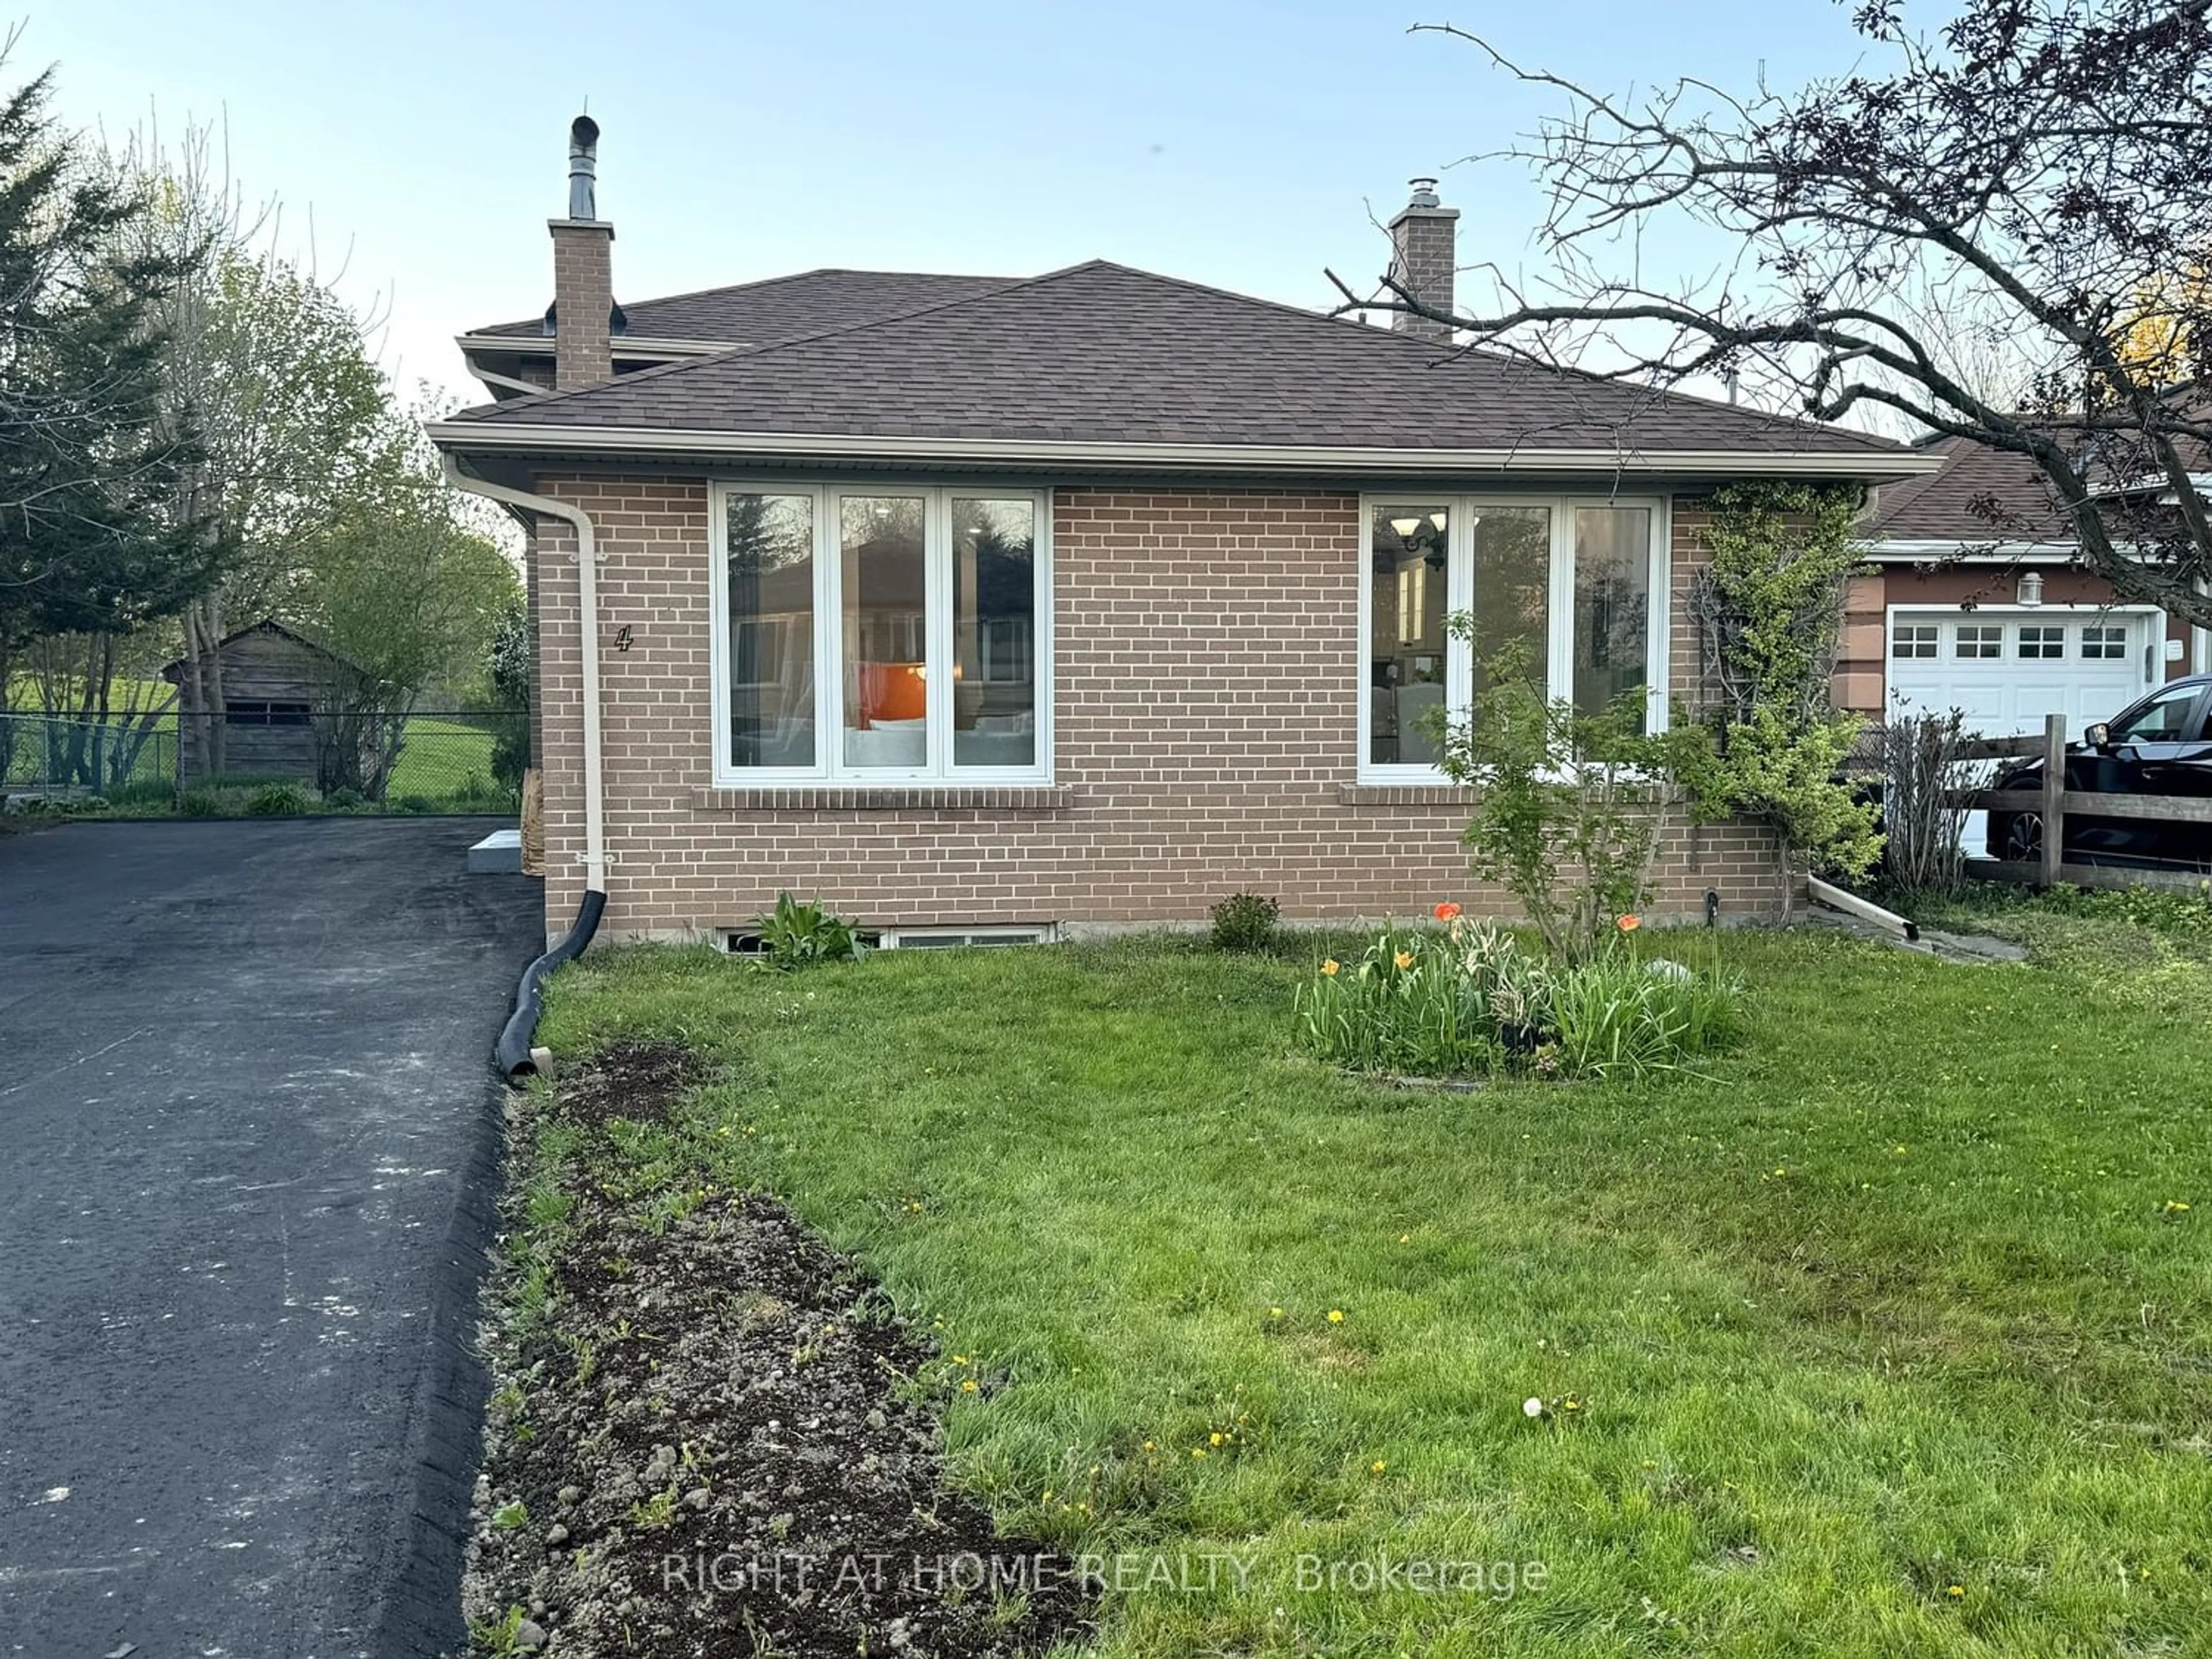 Home with brick exterior material for 4 Aurora Heights Dr, Aurora Ontario L4G 2W4